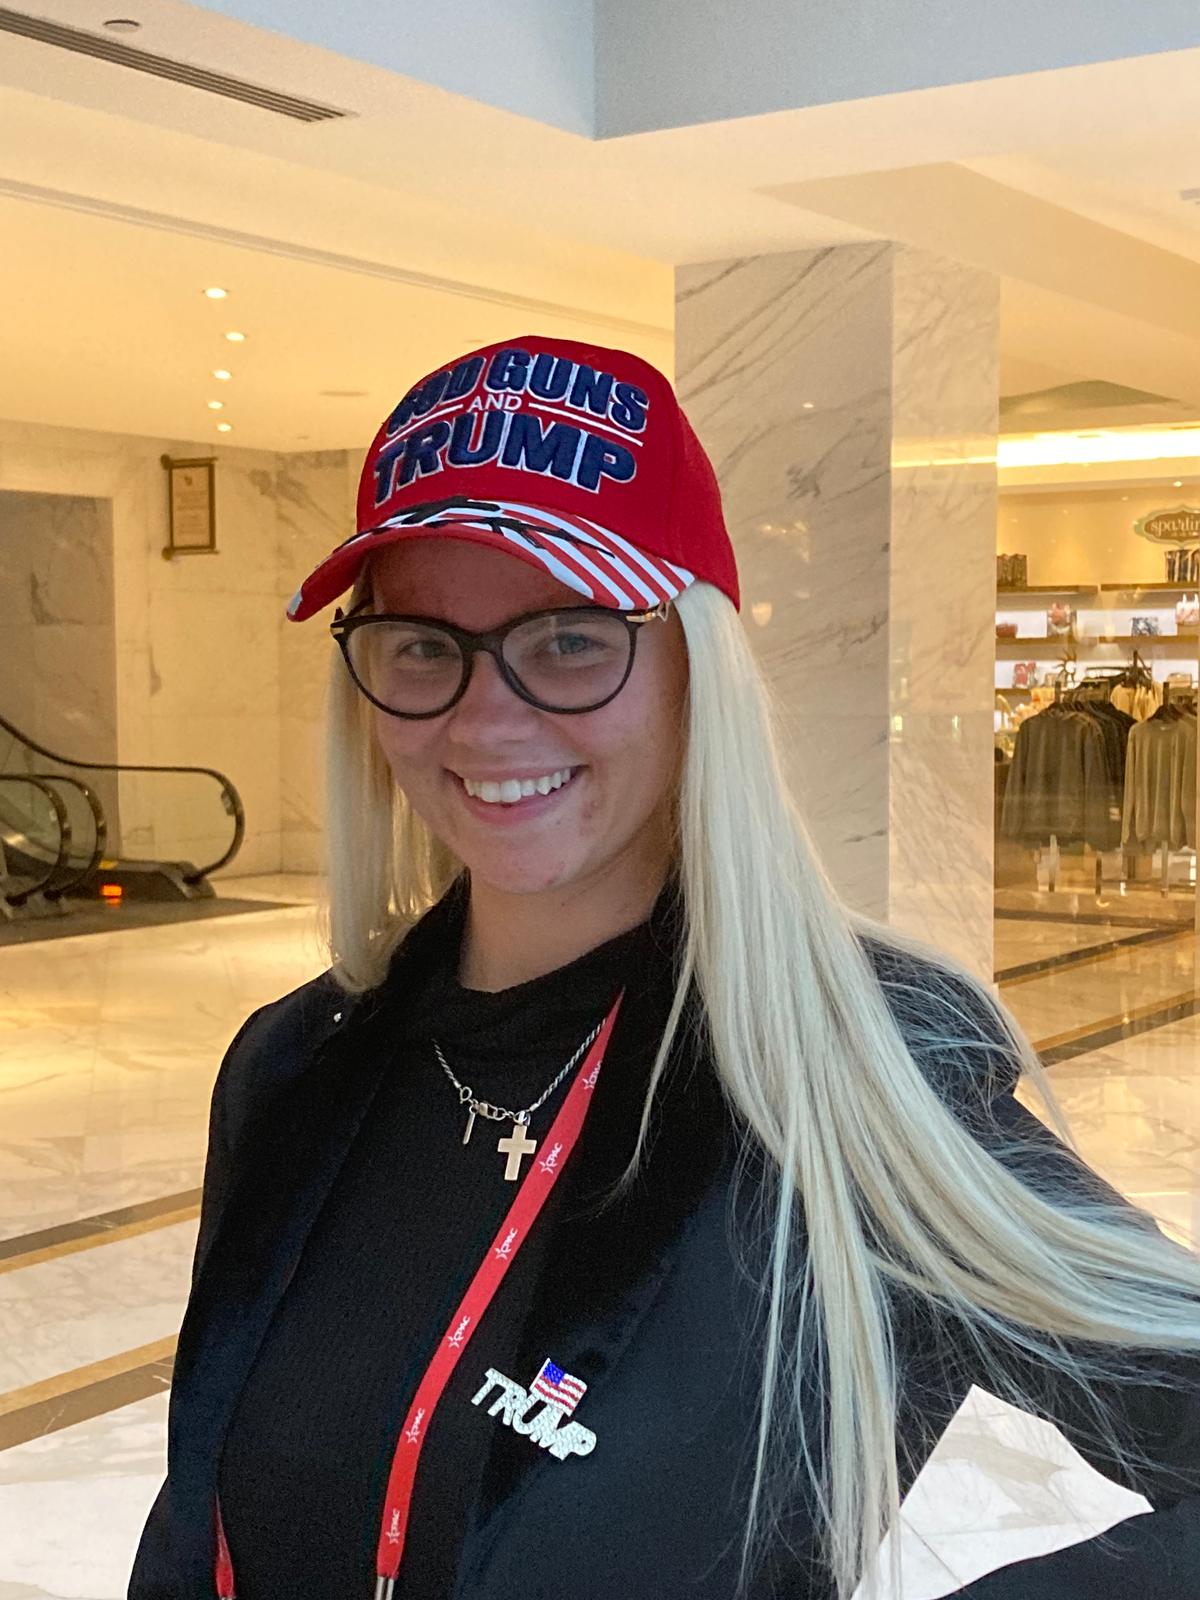 Patrycja Brylska, 24, sports her Trump-loving style at CPAC on March 2, 2023. (Janice Hisle/The Epoch Times)